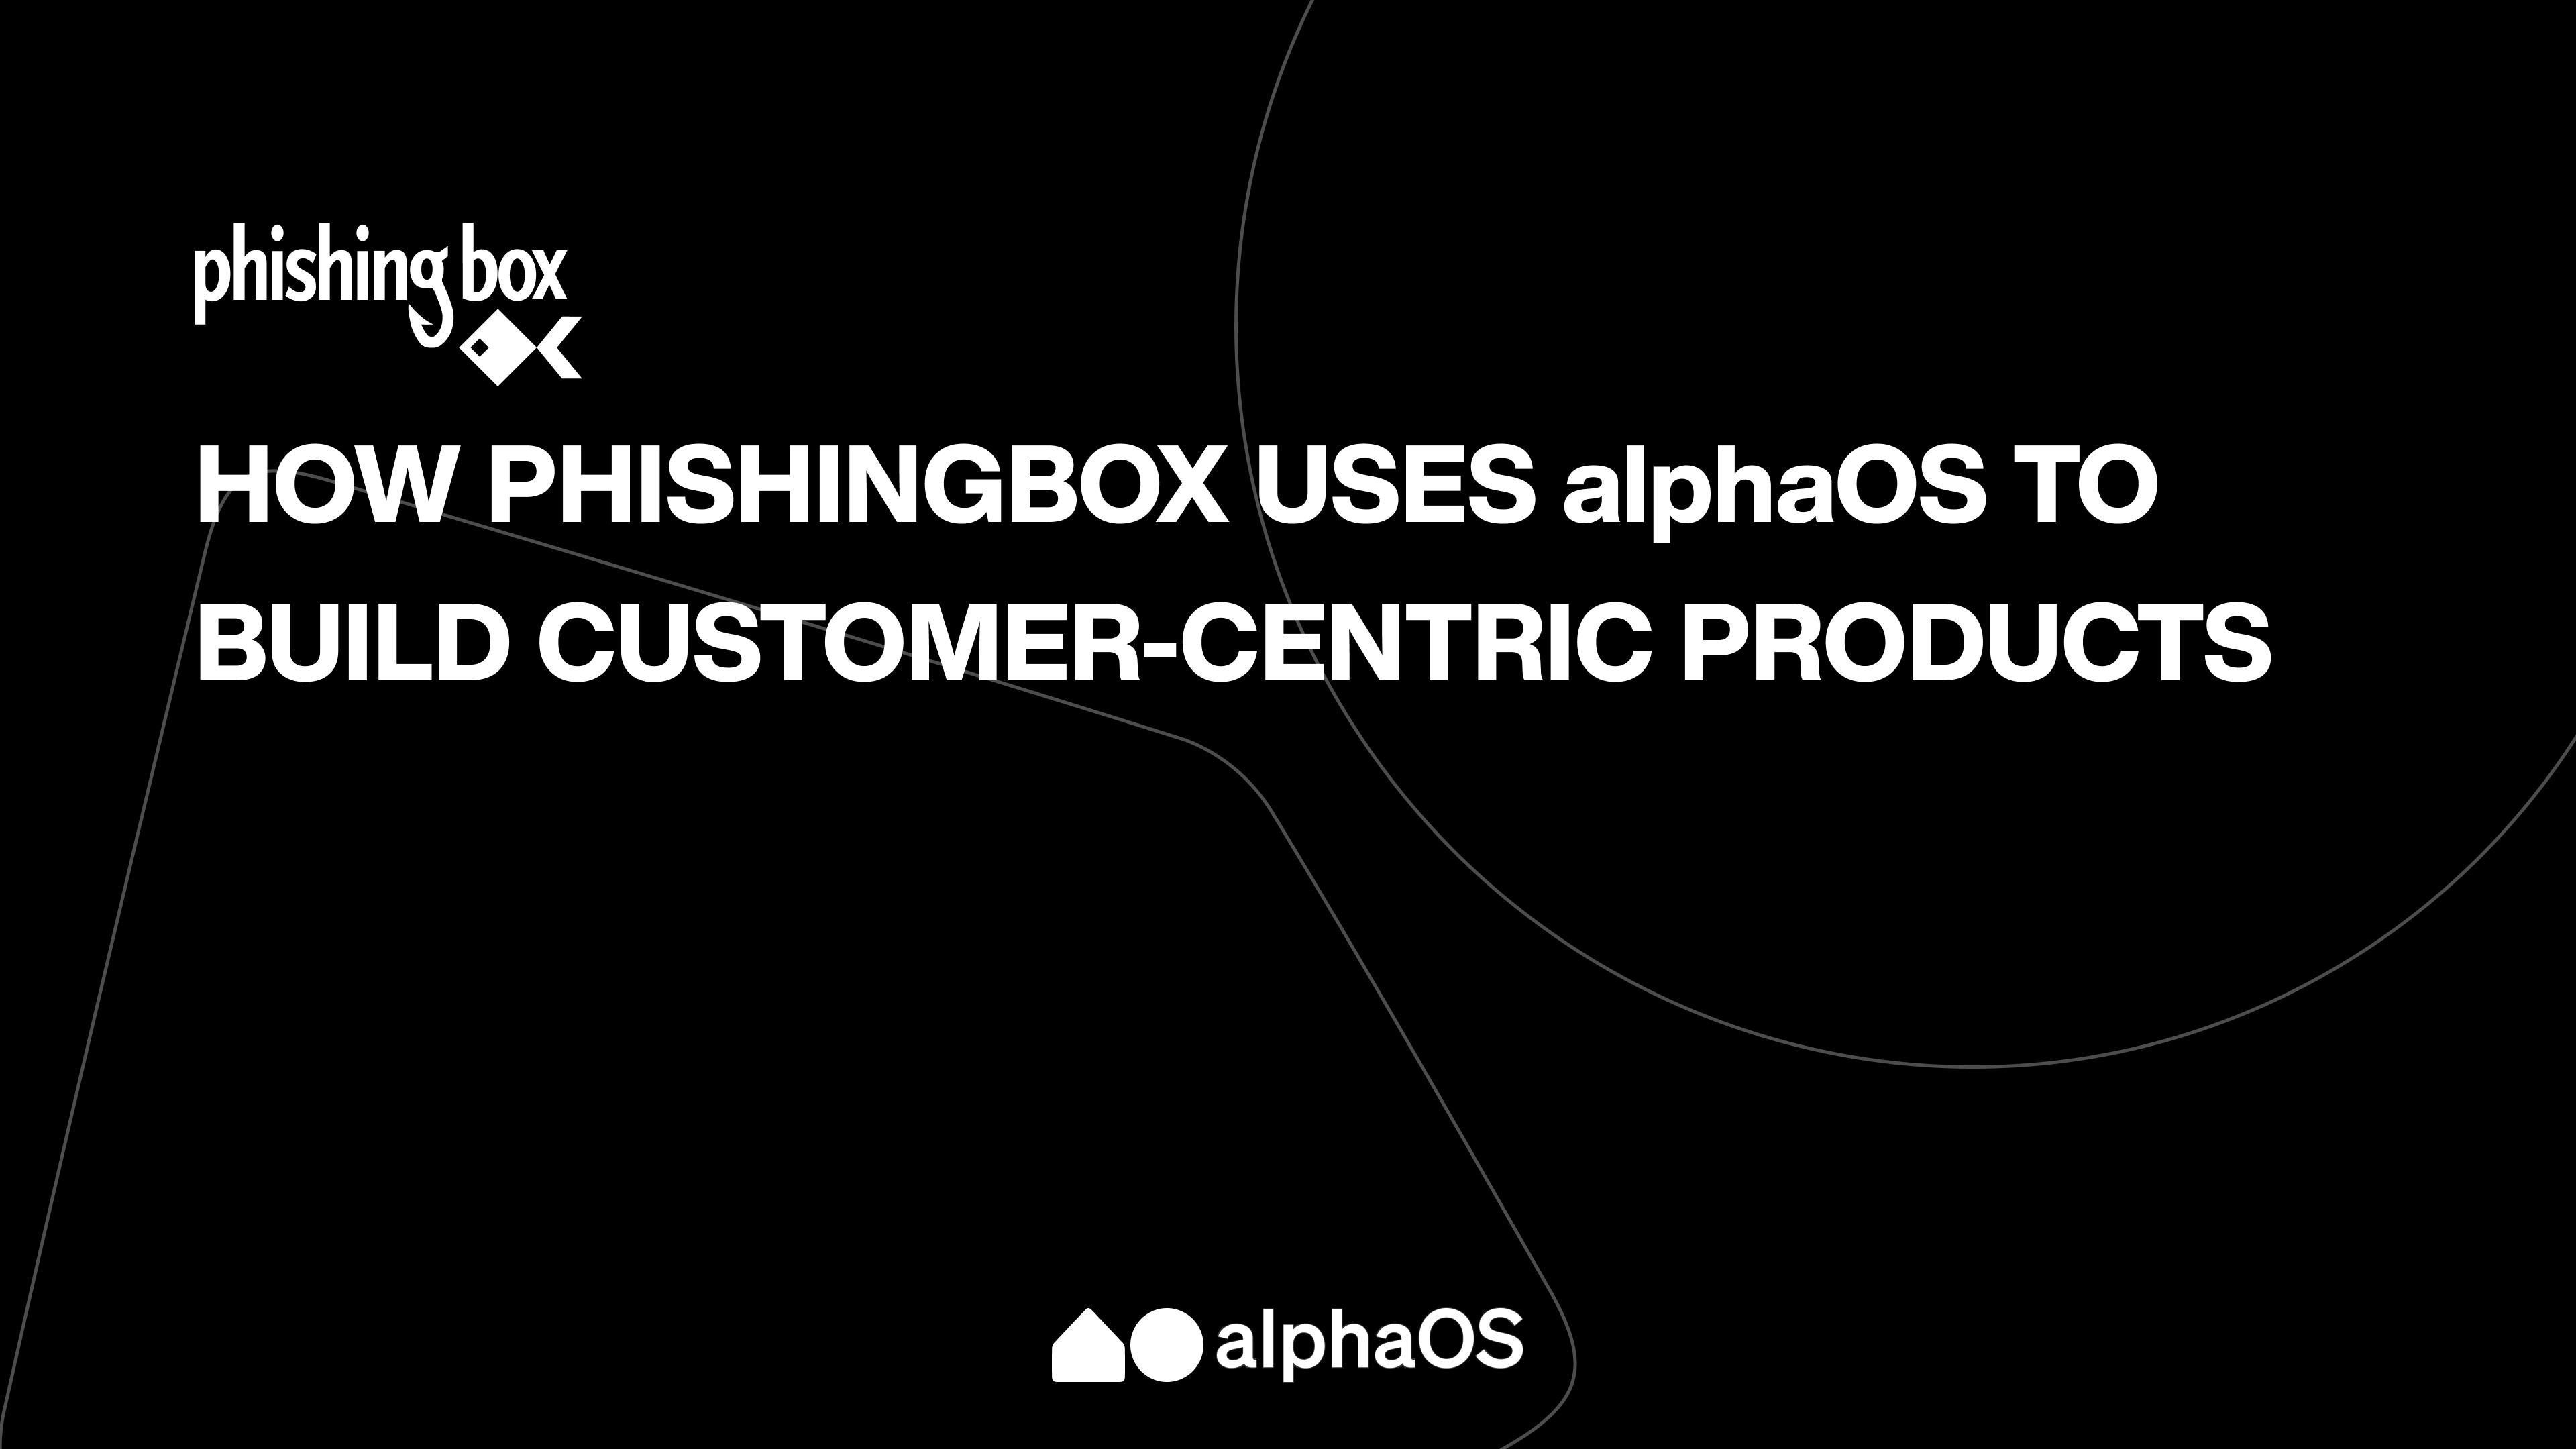 How PhishingBox uses alphaOS to build customer-centric products